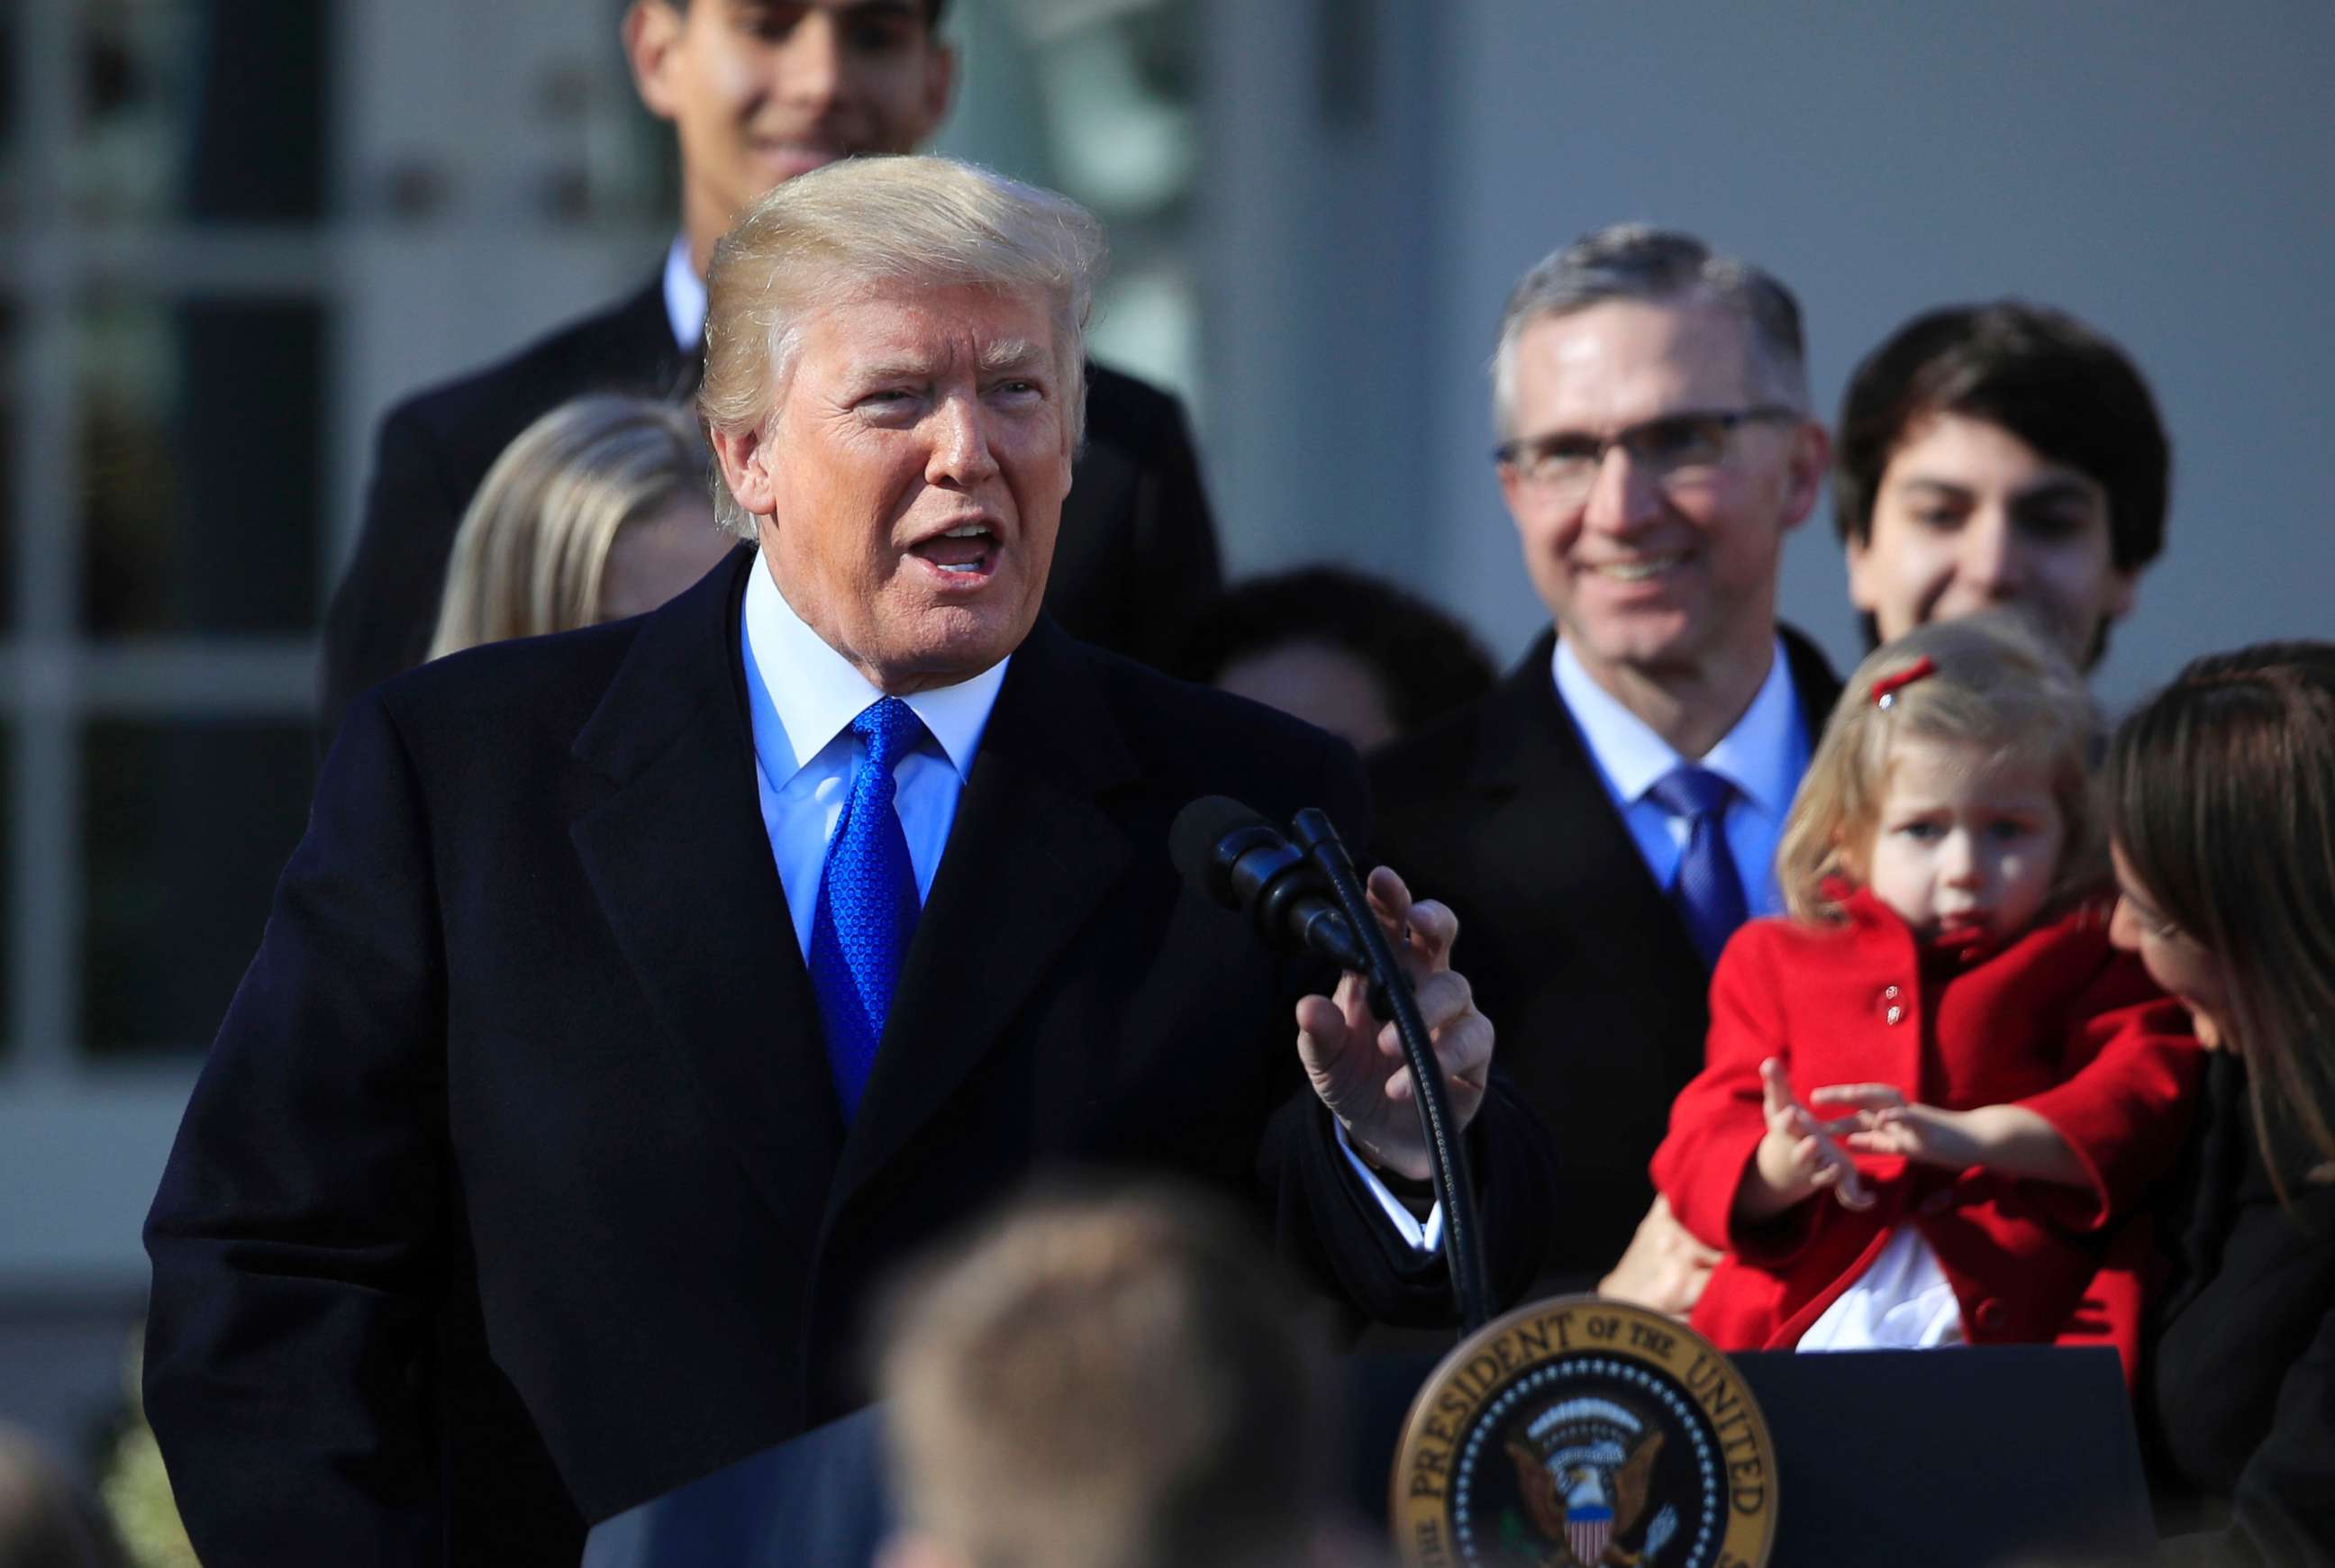 PHOTO: President Donald Trump speaks to participants of the annual March for Life event, in the Rose Garden of the White House in Washington, Jan. 19, 2018.